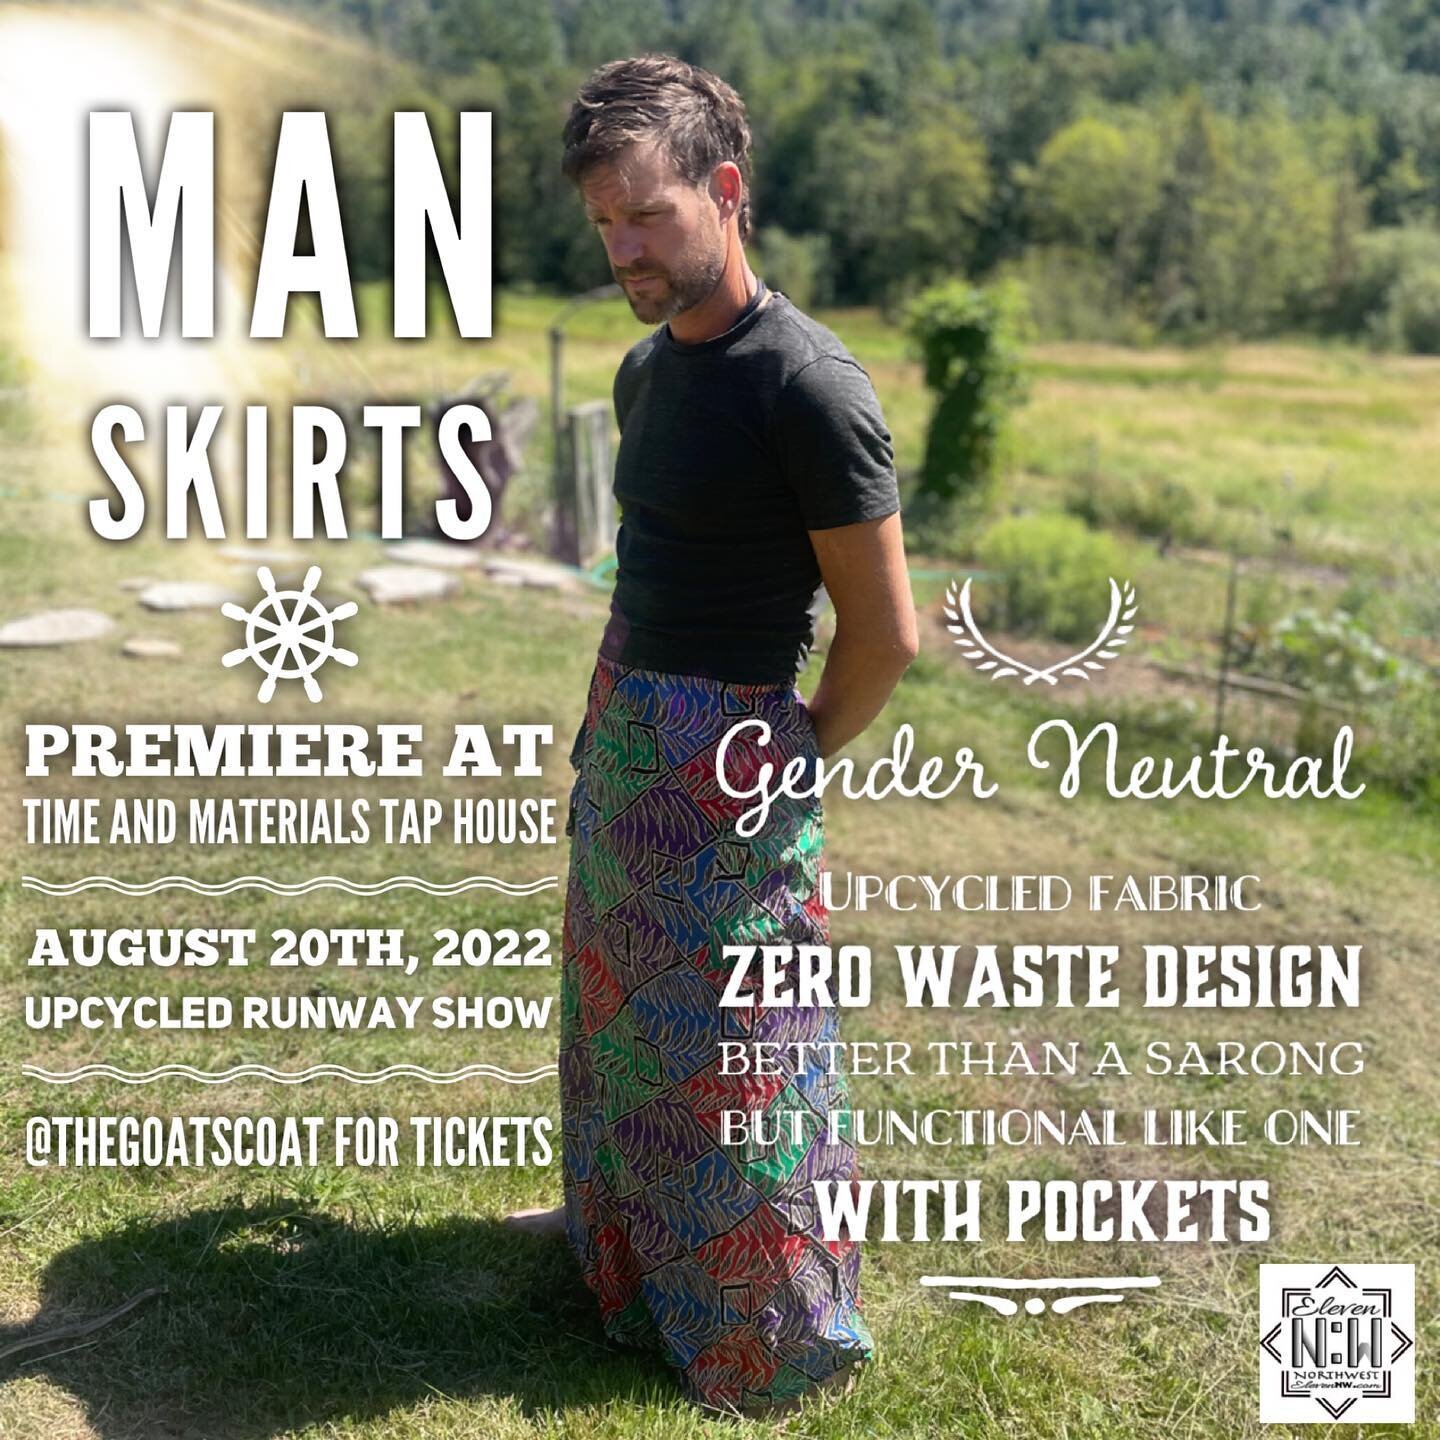 Man Skirts- Why? Because comfort is critical for everyone and even manly men can wear skirts if they choose. This design was made to create zero waste from Yardage of fabric I found @ragfinery_ . Grand premiere of Man skirts @thegoatscoat Upcycled Ru